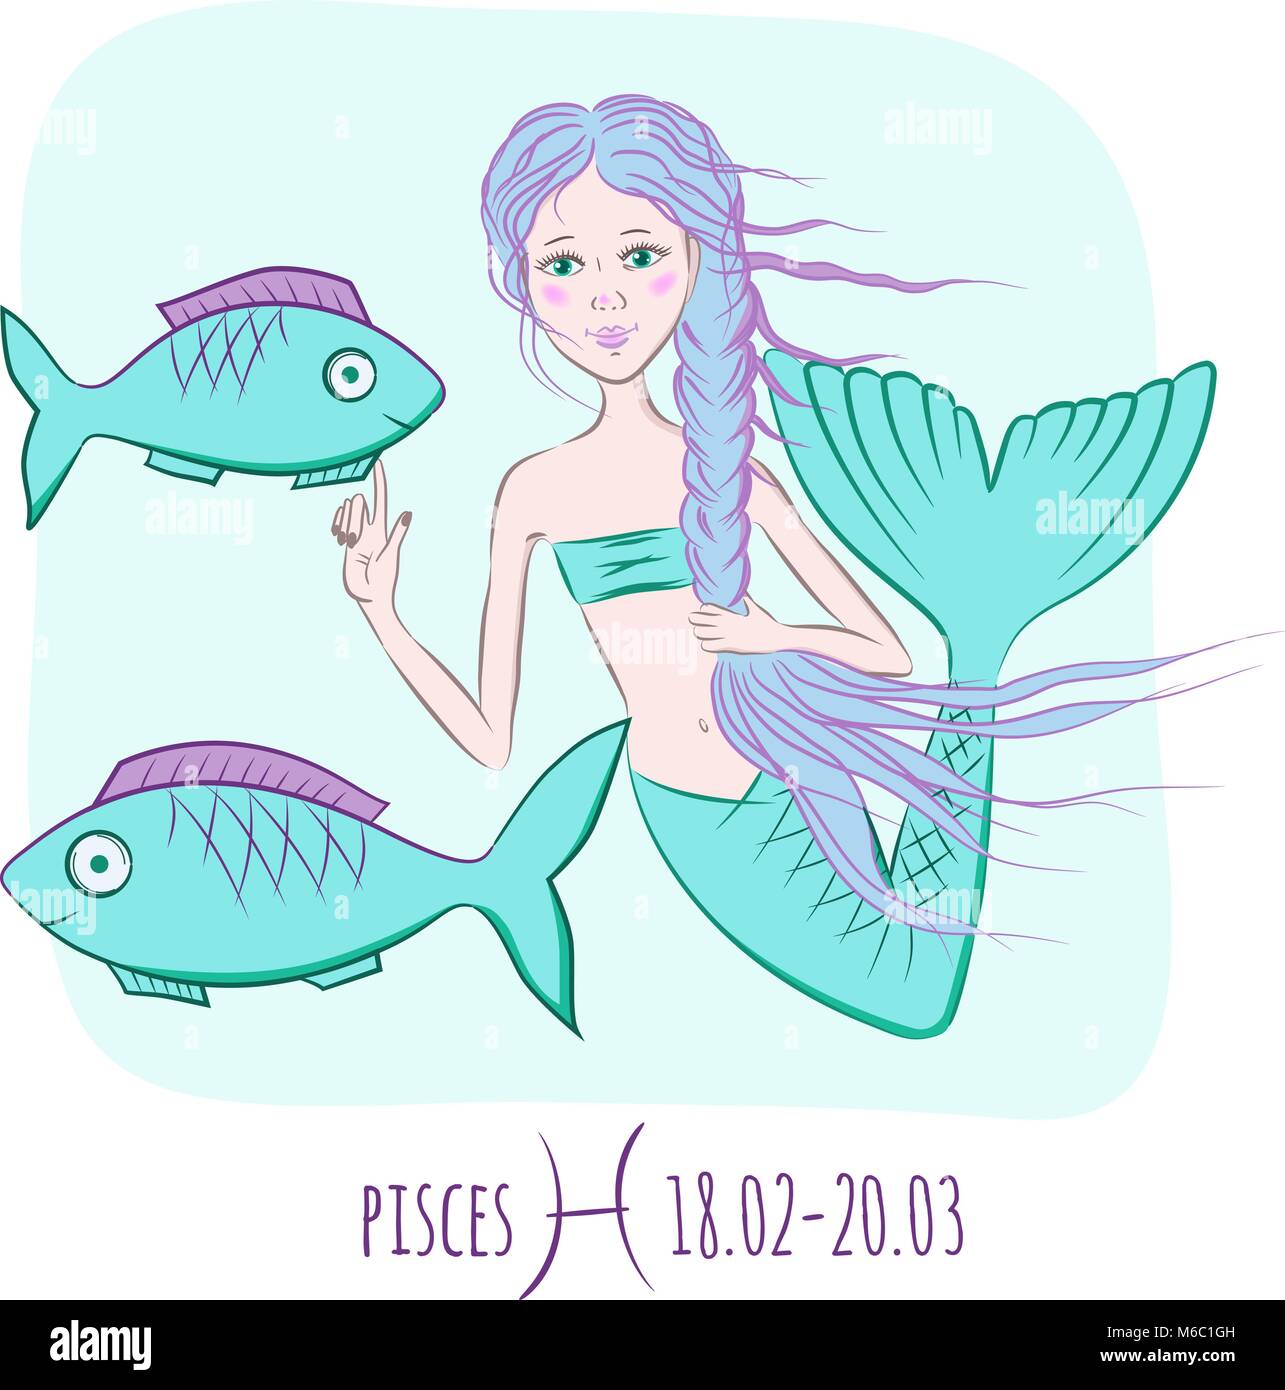 Pisces Zodiac astrological sign. Mermaid and two fishes vector illustration Stock Vector